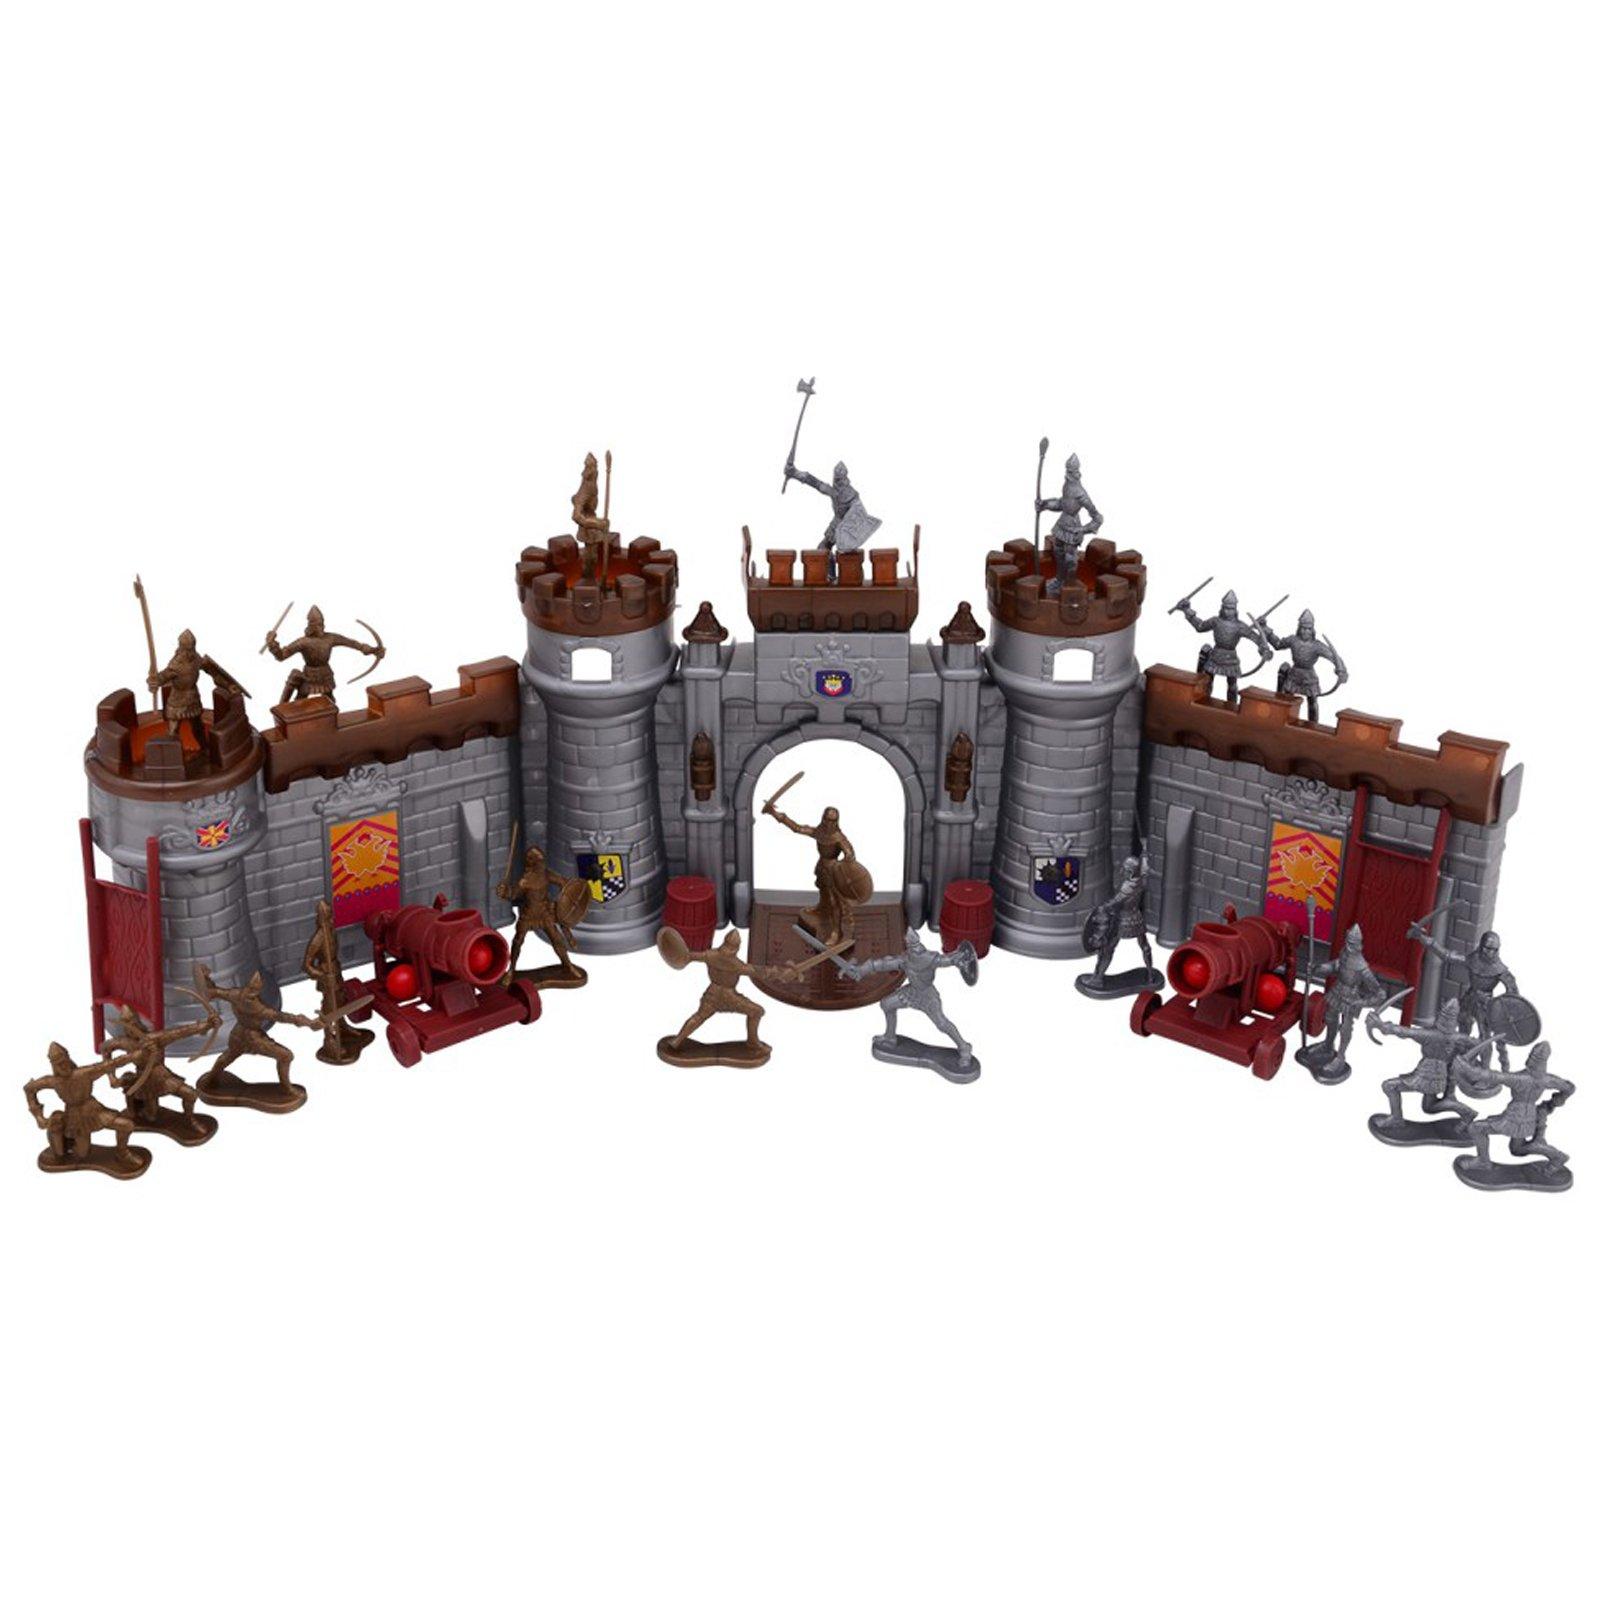 Medieval Knights Castle Playset Fortress Fun Imaginative Role Play Ages 5+